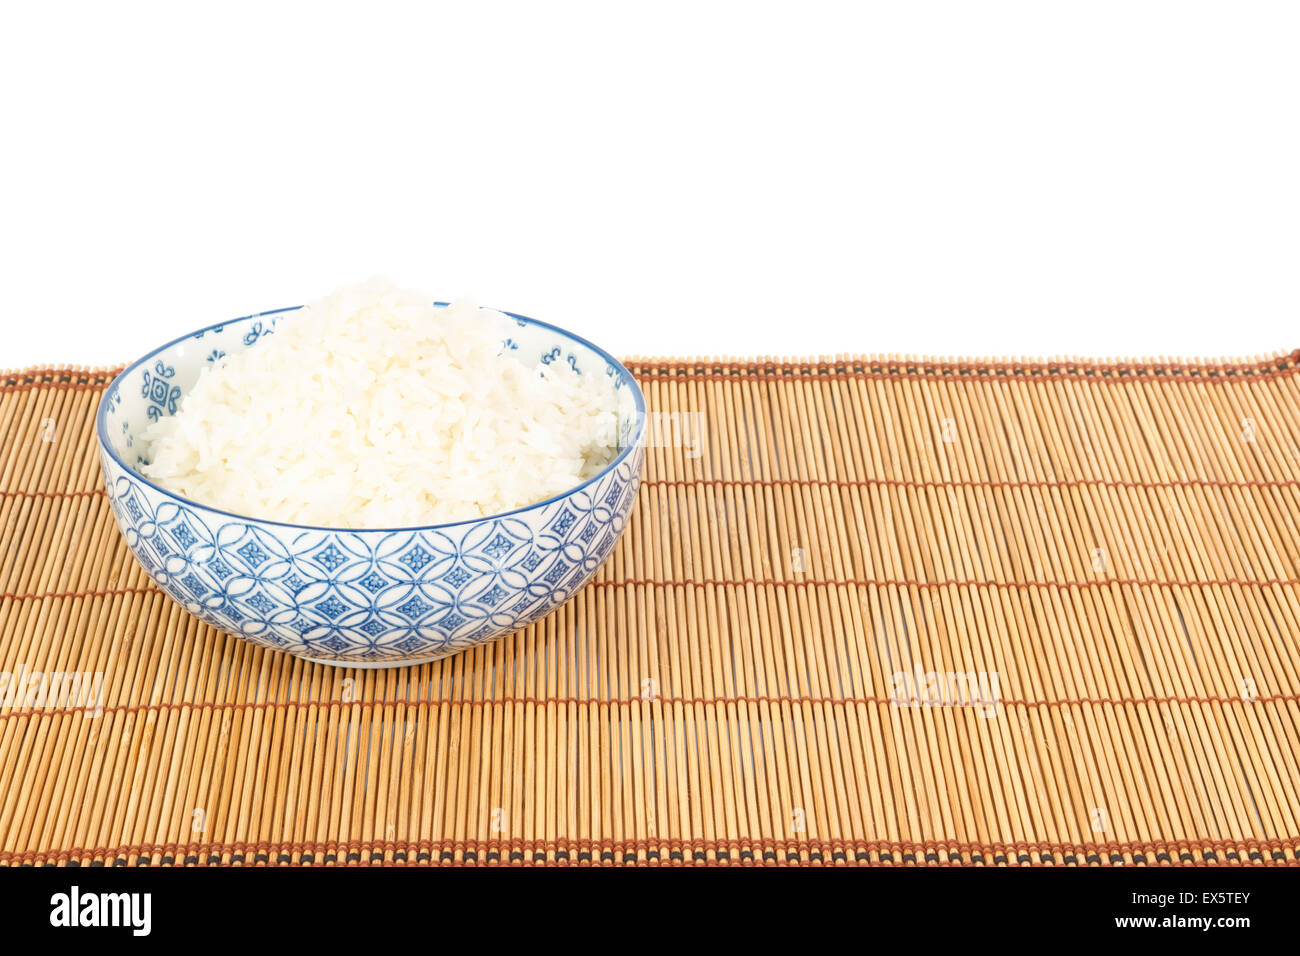 Bowl of rice on placemat in Asian style against white background Stock Photo